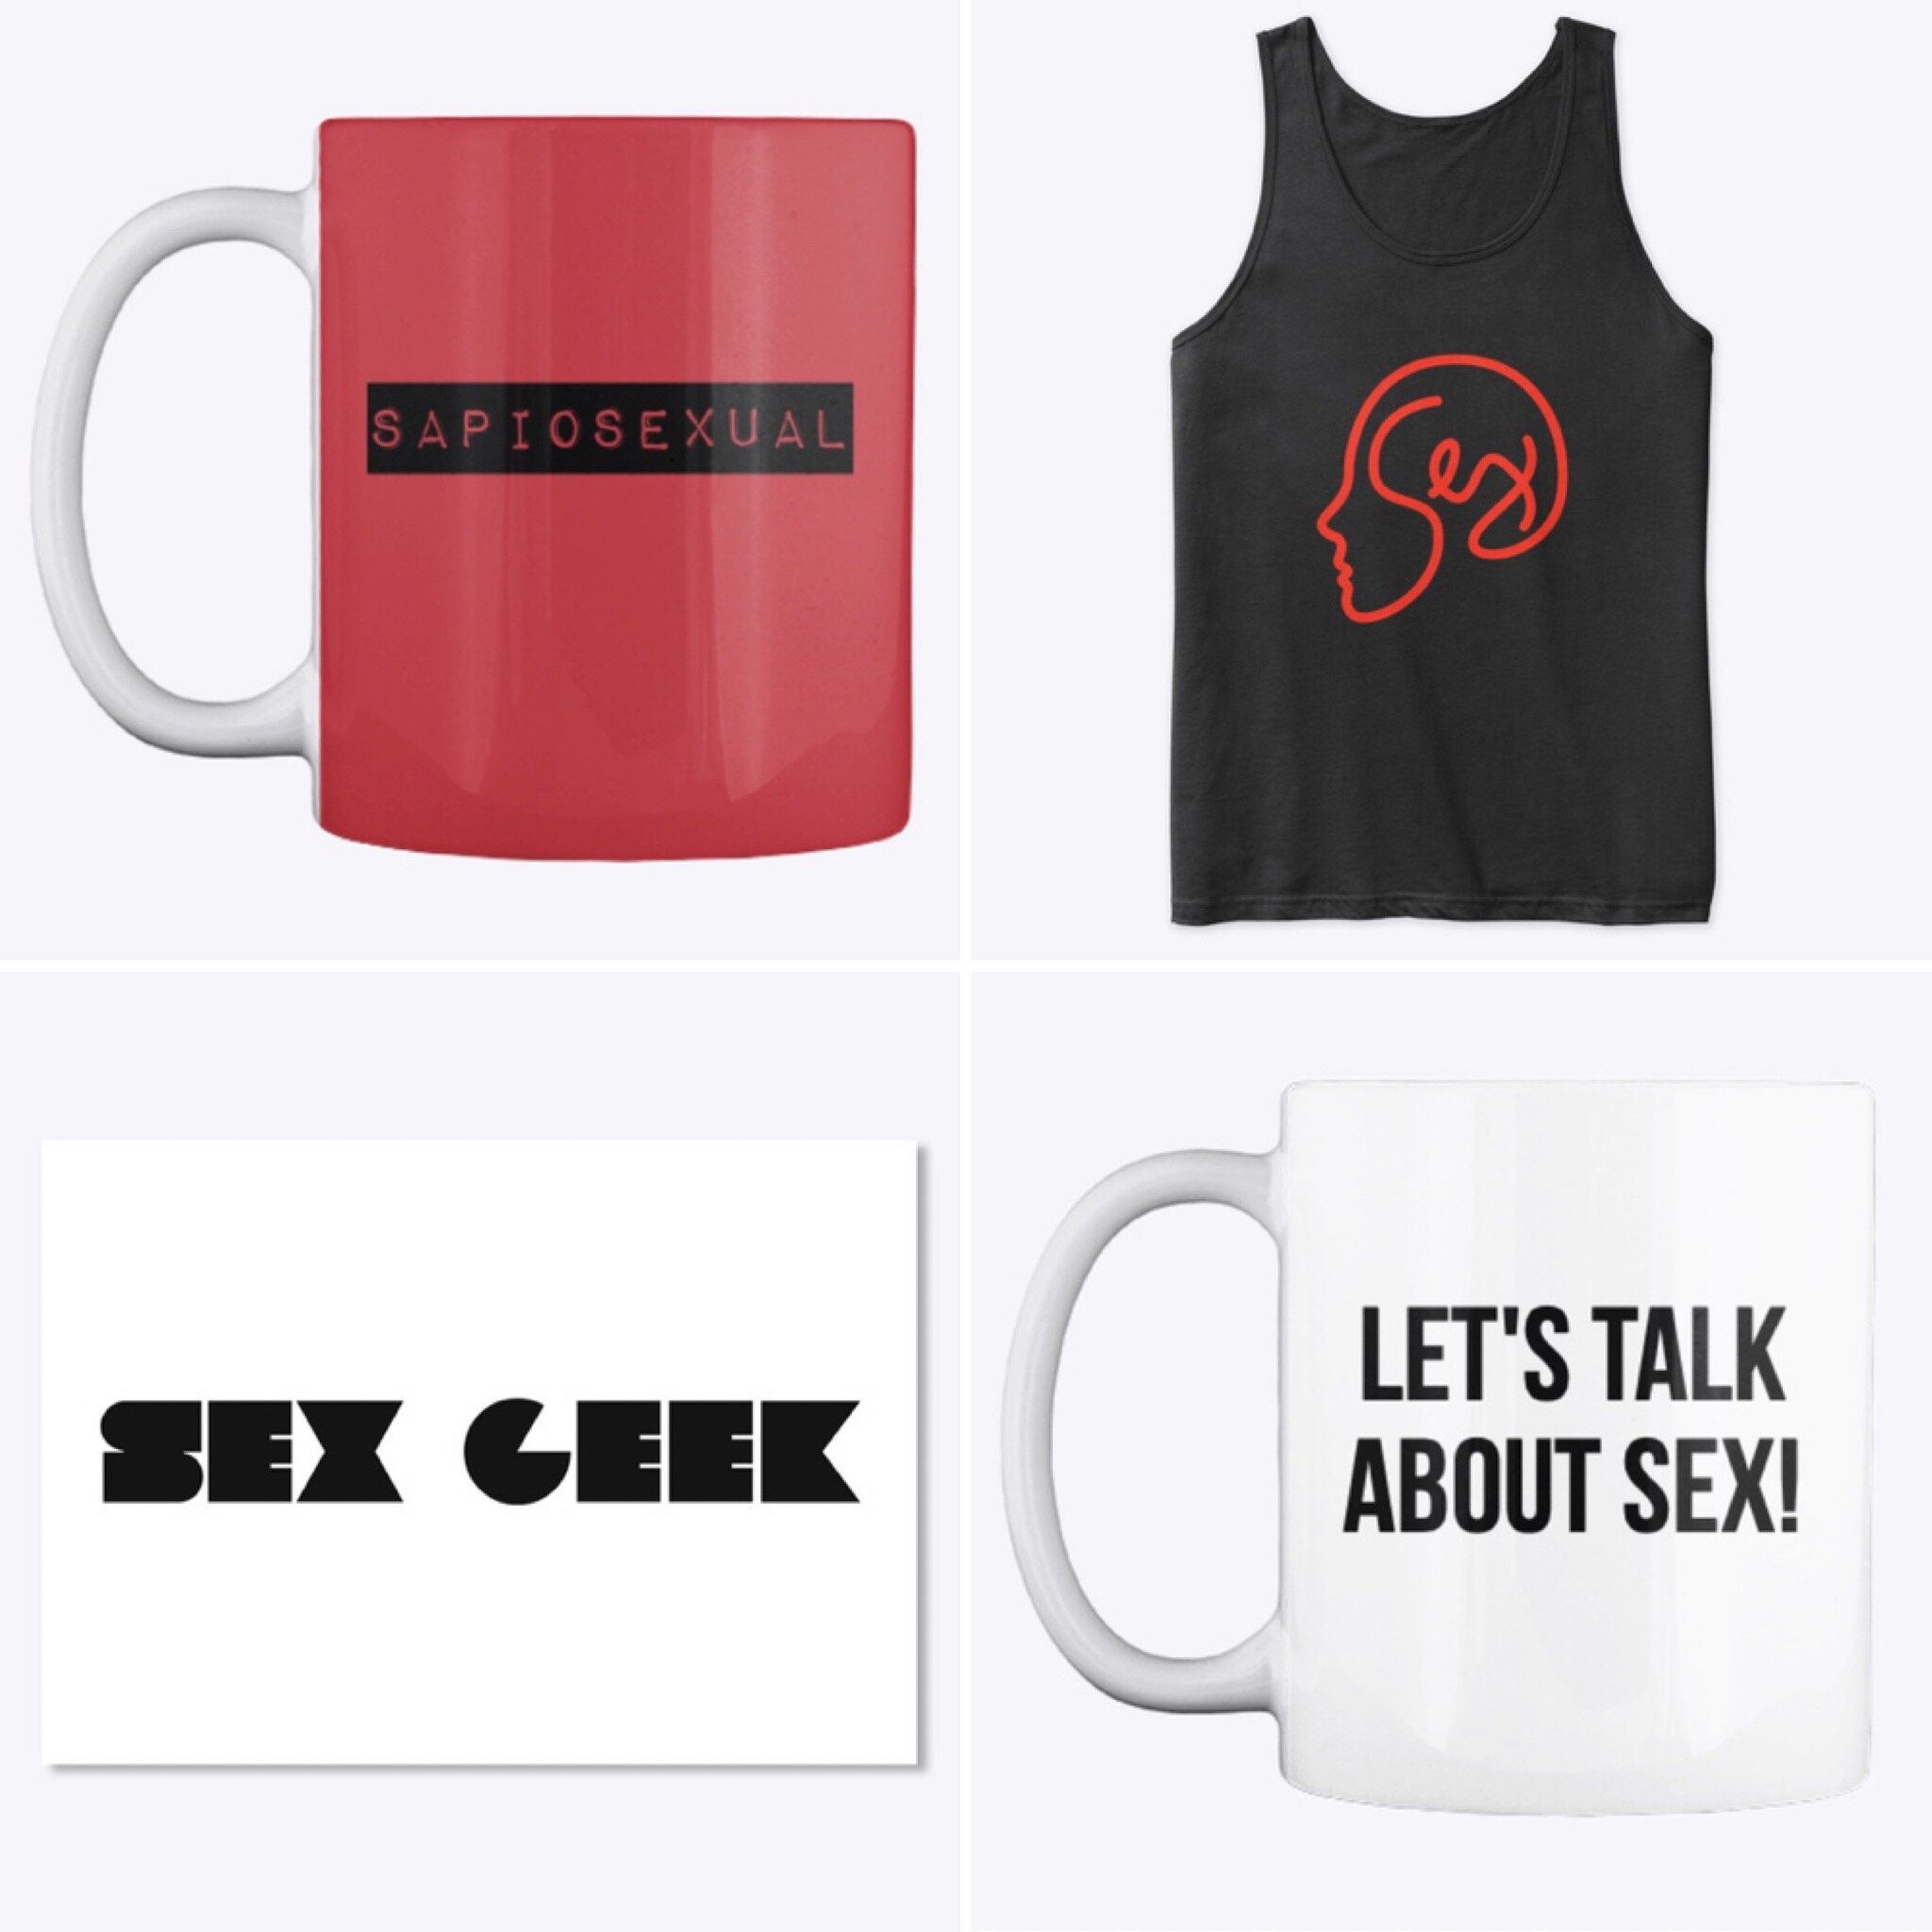 Black Friday Sale at the Sex and Psychology Store!